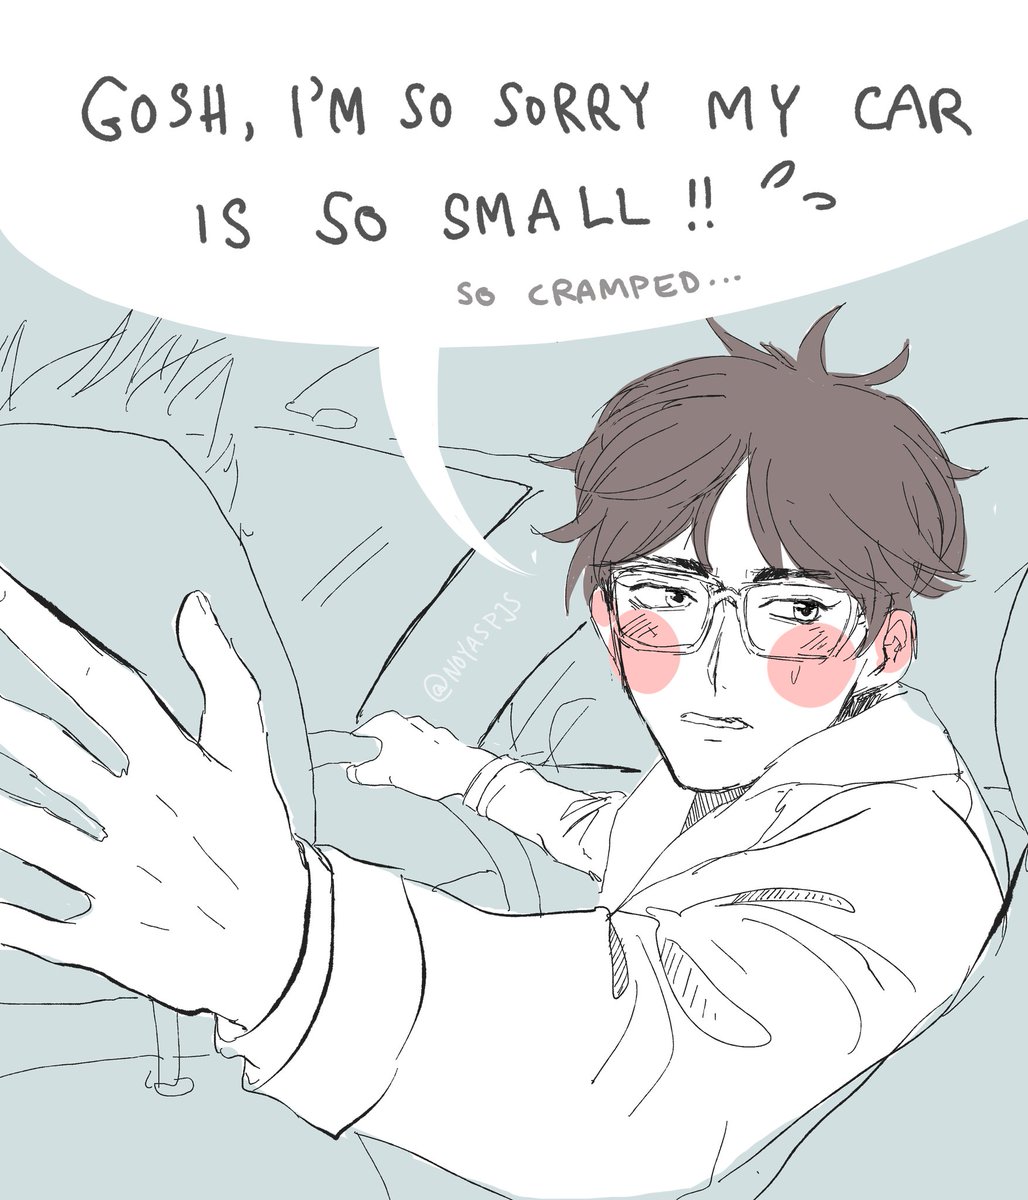 Akaashi was so embarrassed that he couldn't rent a bigger car for their first road trip, but bokuto didn't ...mind...at...all...?️ ? 
#bokuakaweek #BokuAkaWeek2020 #bkak #haikyuu 